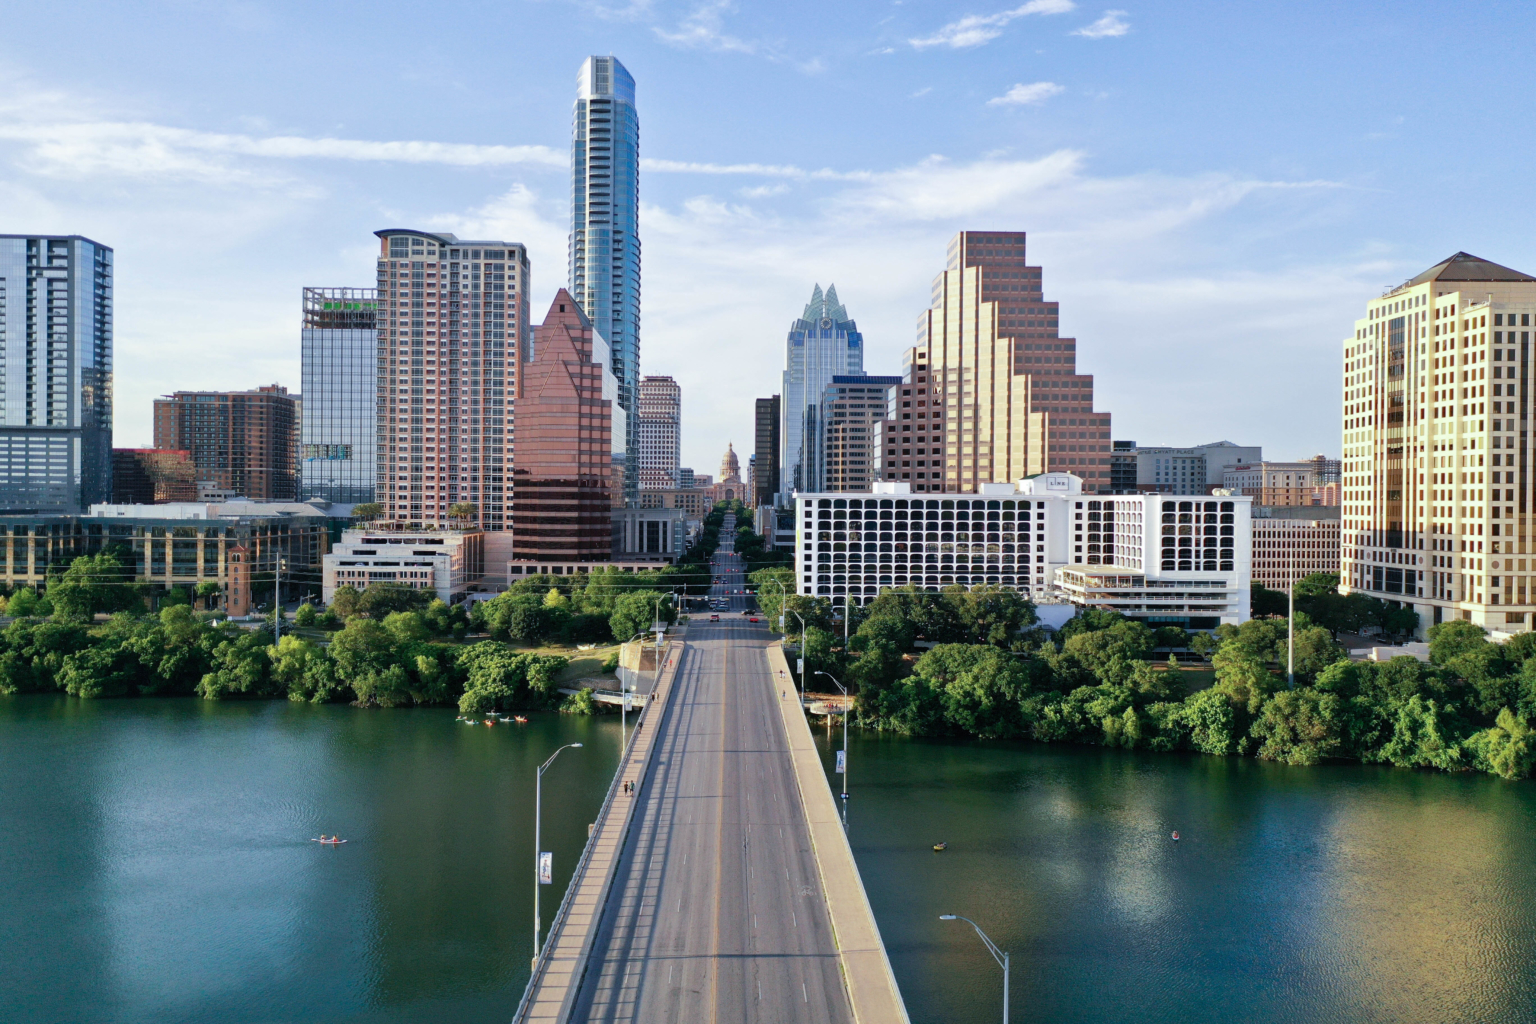 city scape of the austin texas skyline with the lake in the foreground